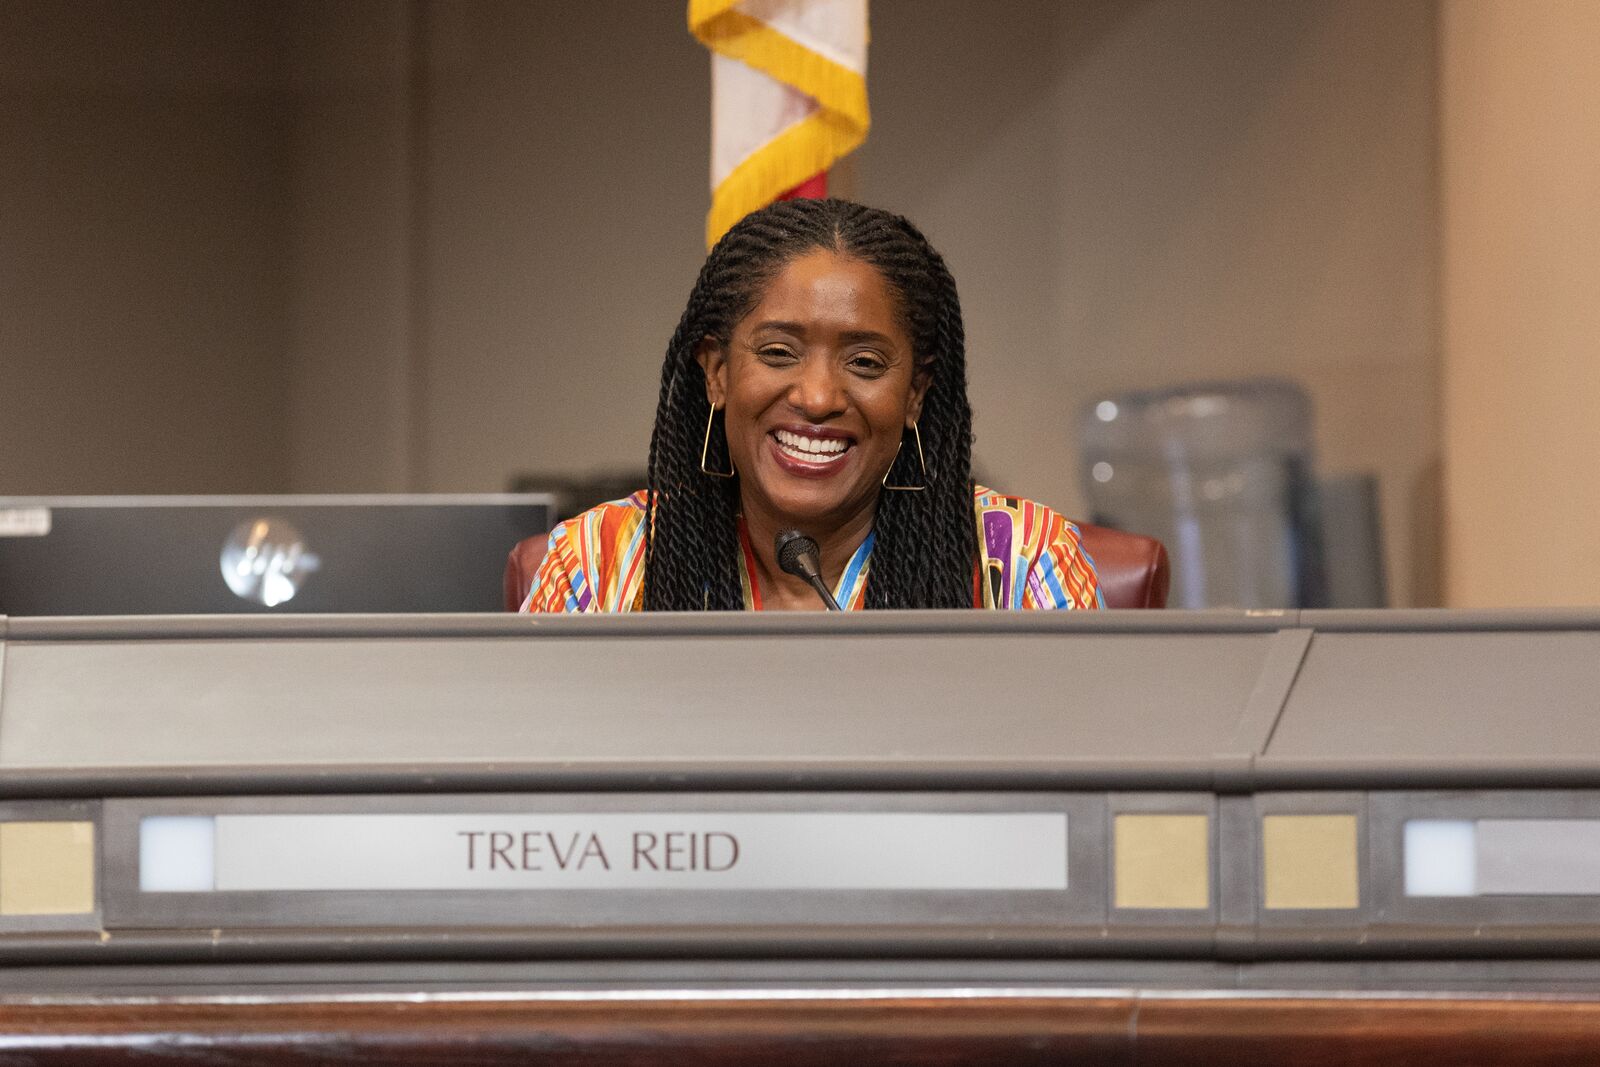 Councilmember Treva Reid smiling and sitting behind the dais of the city council chamber.